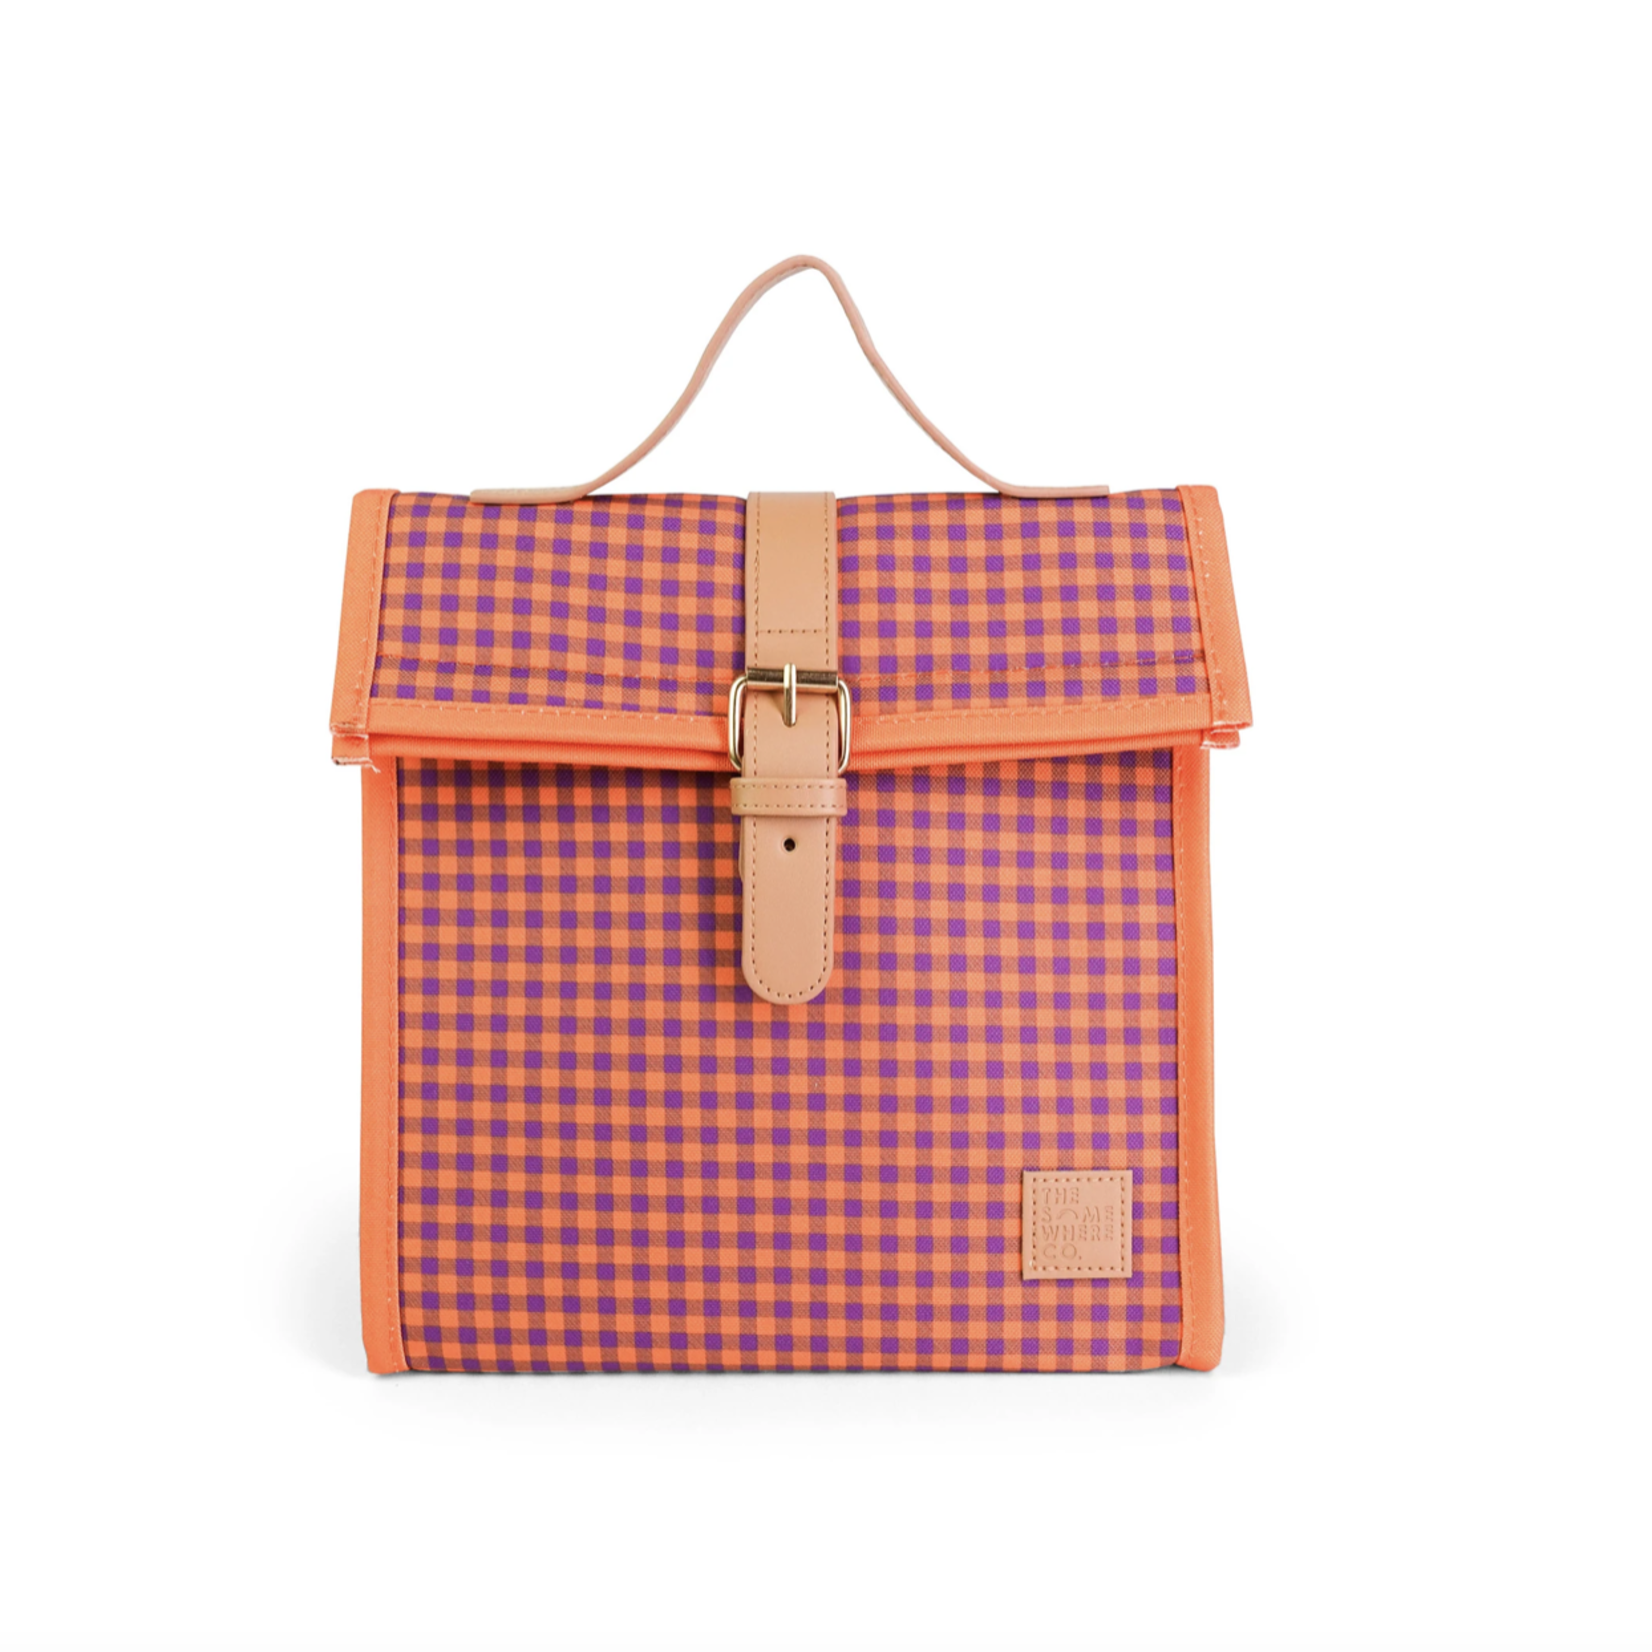 The Somewhere Co Lunch Satchel